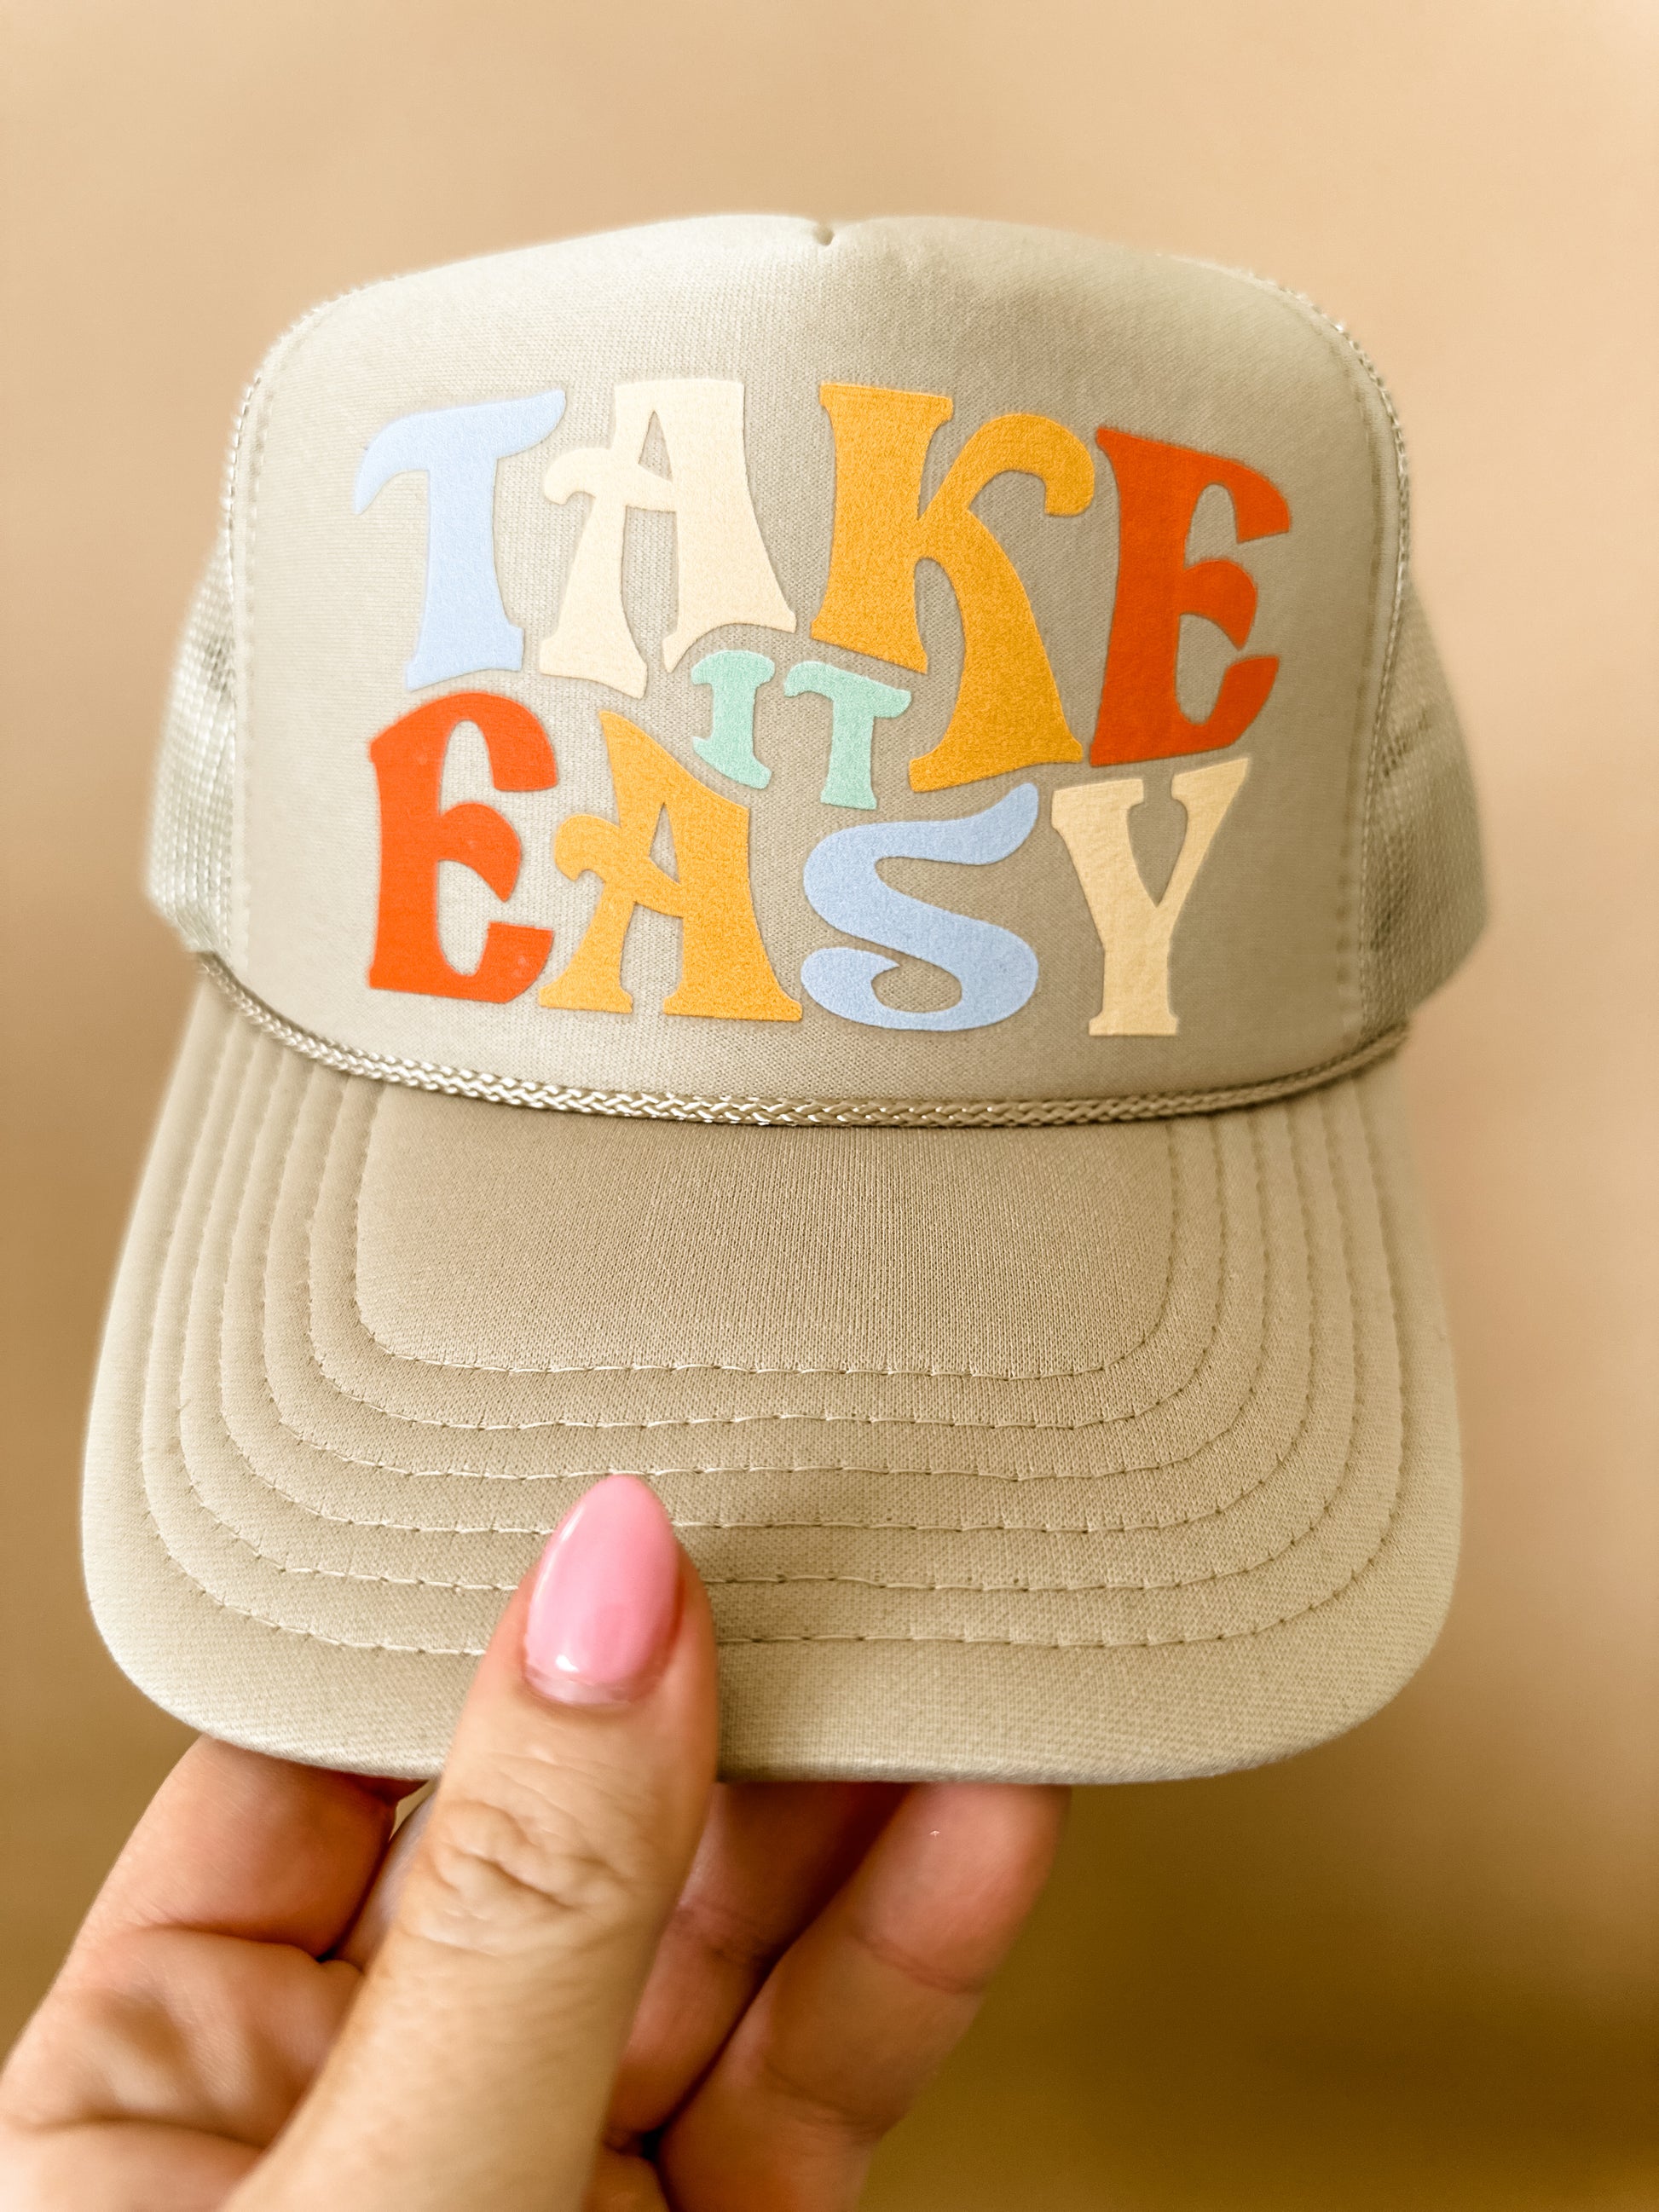 Take It Easy Hat | Adult-Sister Shirts-Sister Shirts, Cute & Custom Tees for Mama & Littles in Trussville, Alabama.